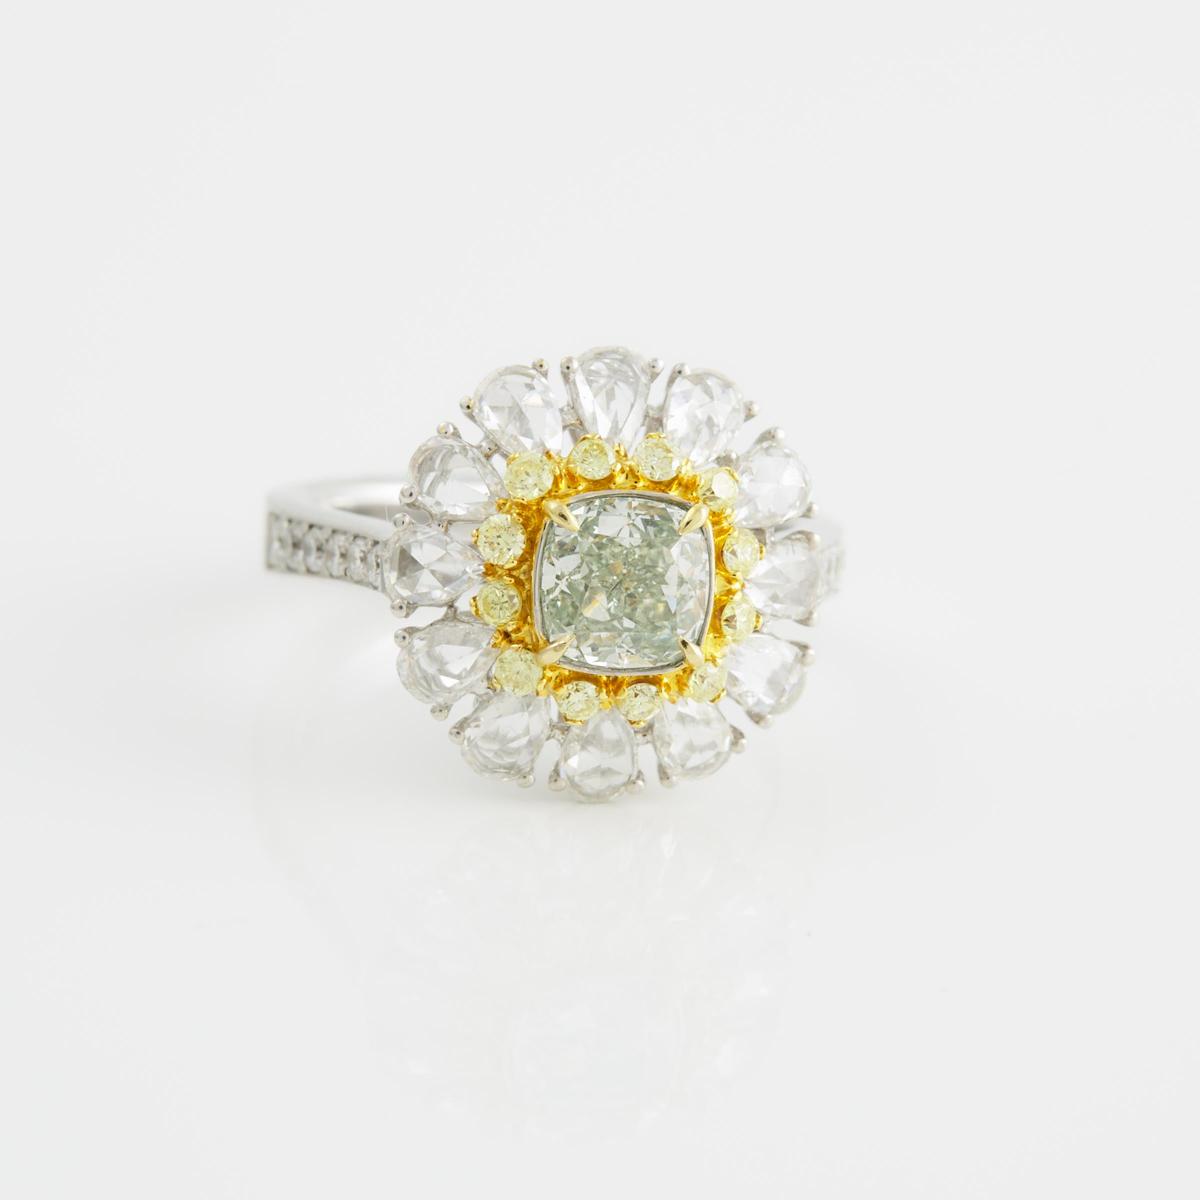 18k White And Yellow Gold Filigree Ring, set with a cushion cut green diamond (1.02ct.) encircled by